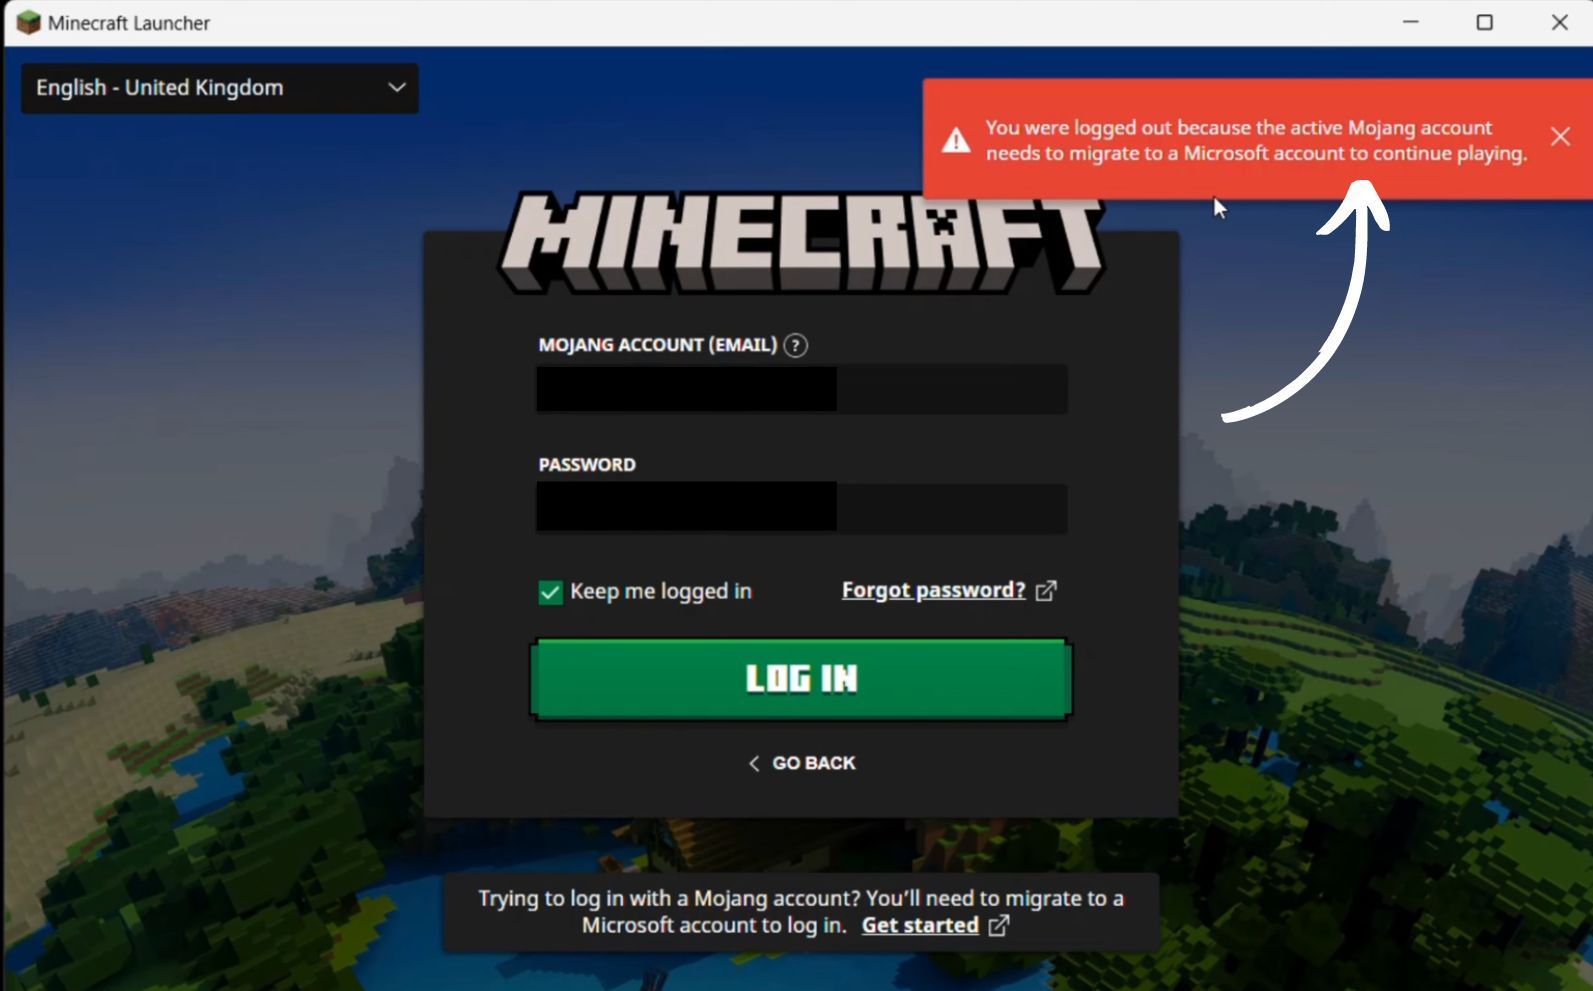 Minecraft Launcher Mojang Account Warning on Log In Screen